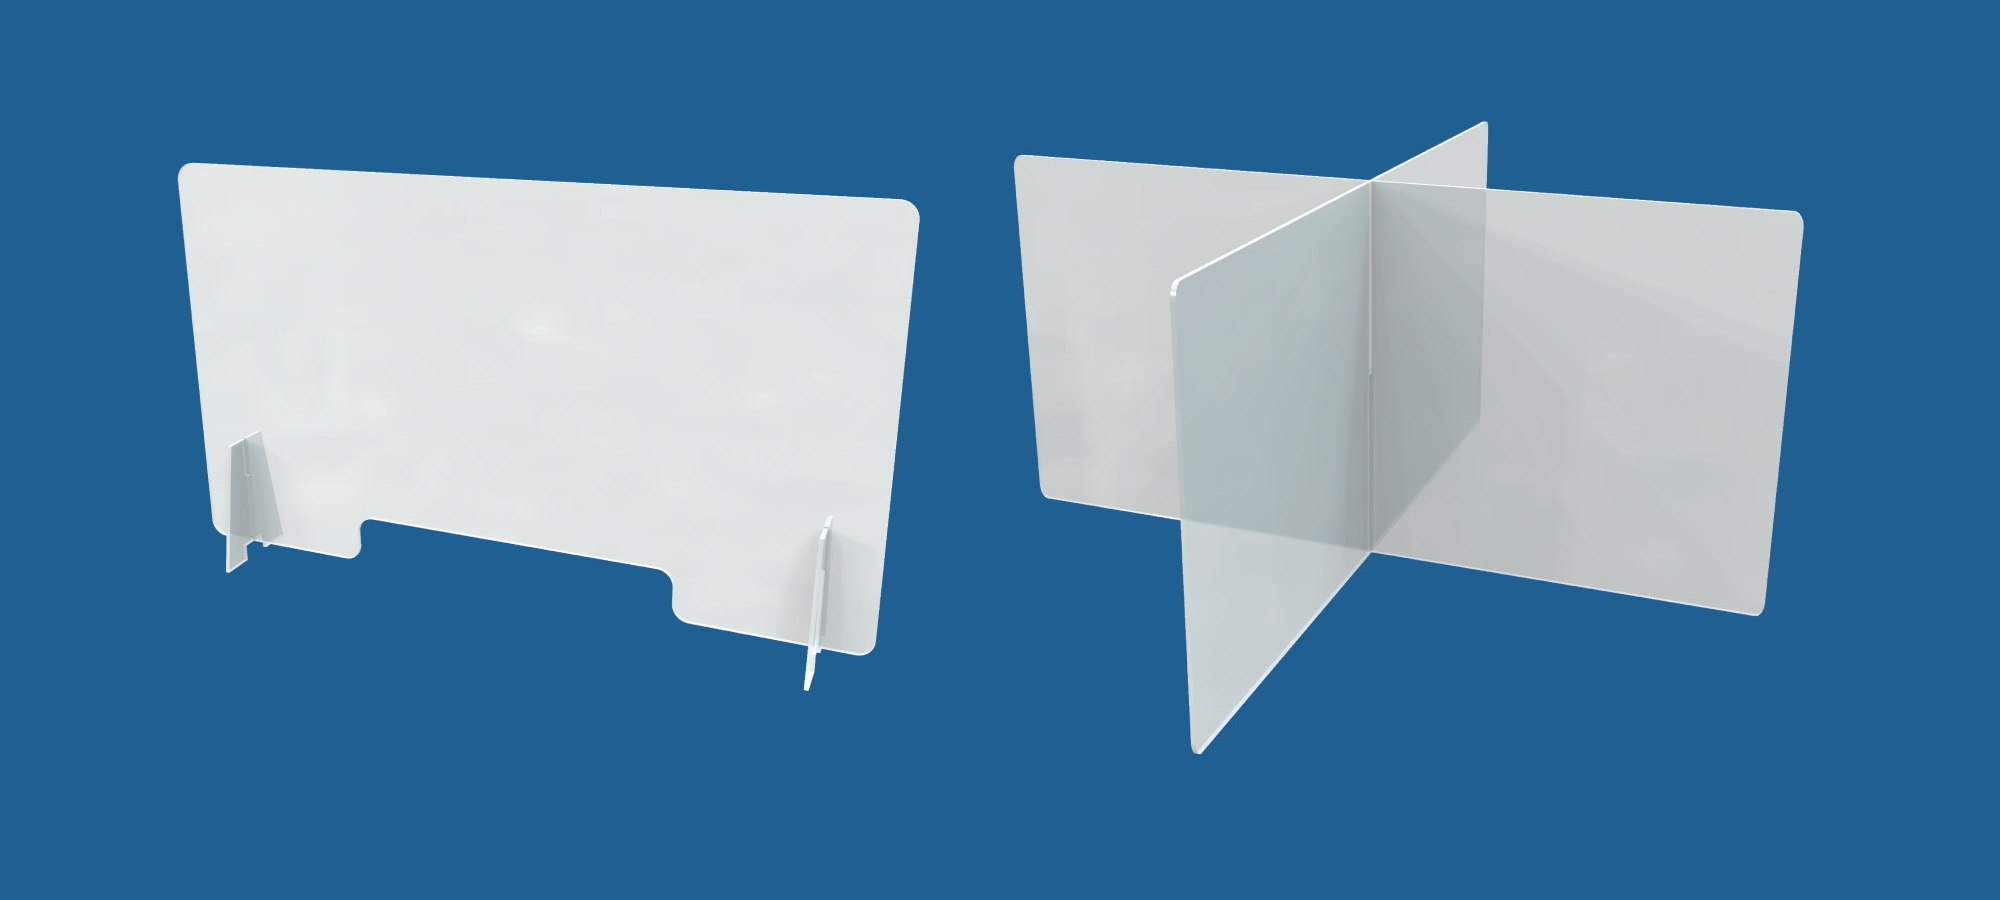 TableSafe Dividers Now Available